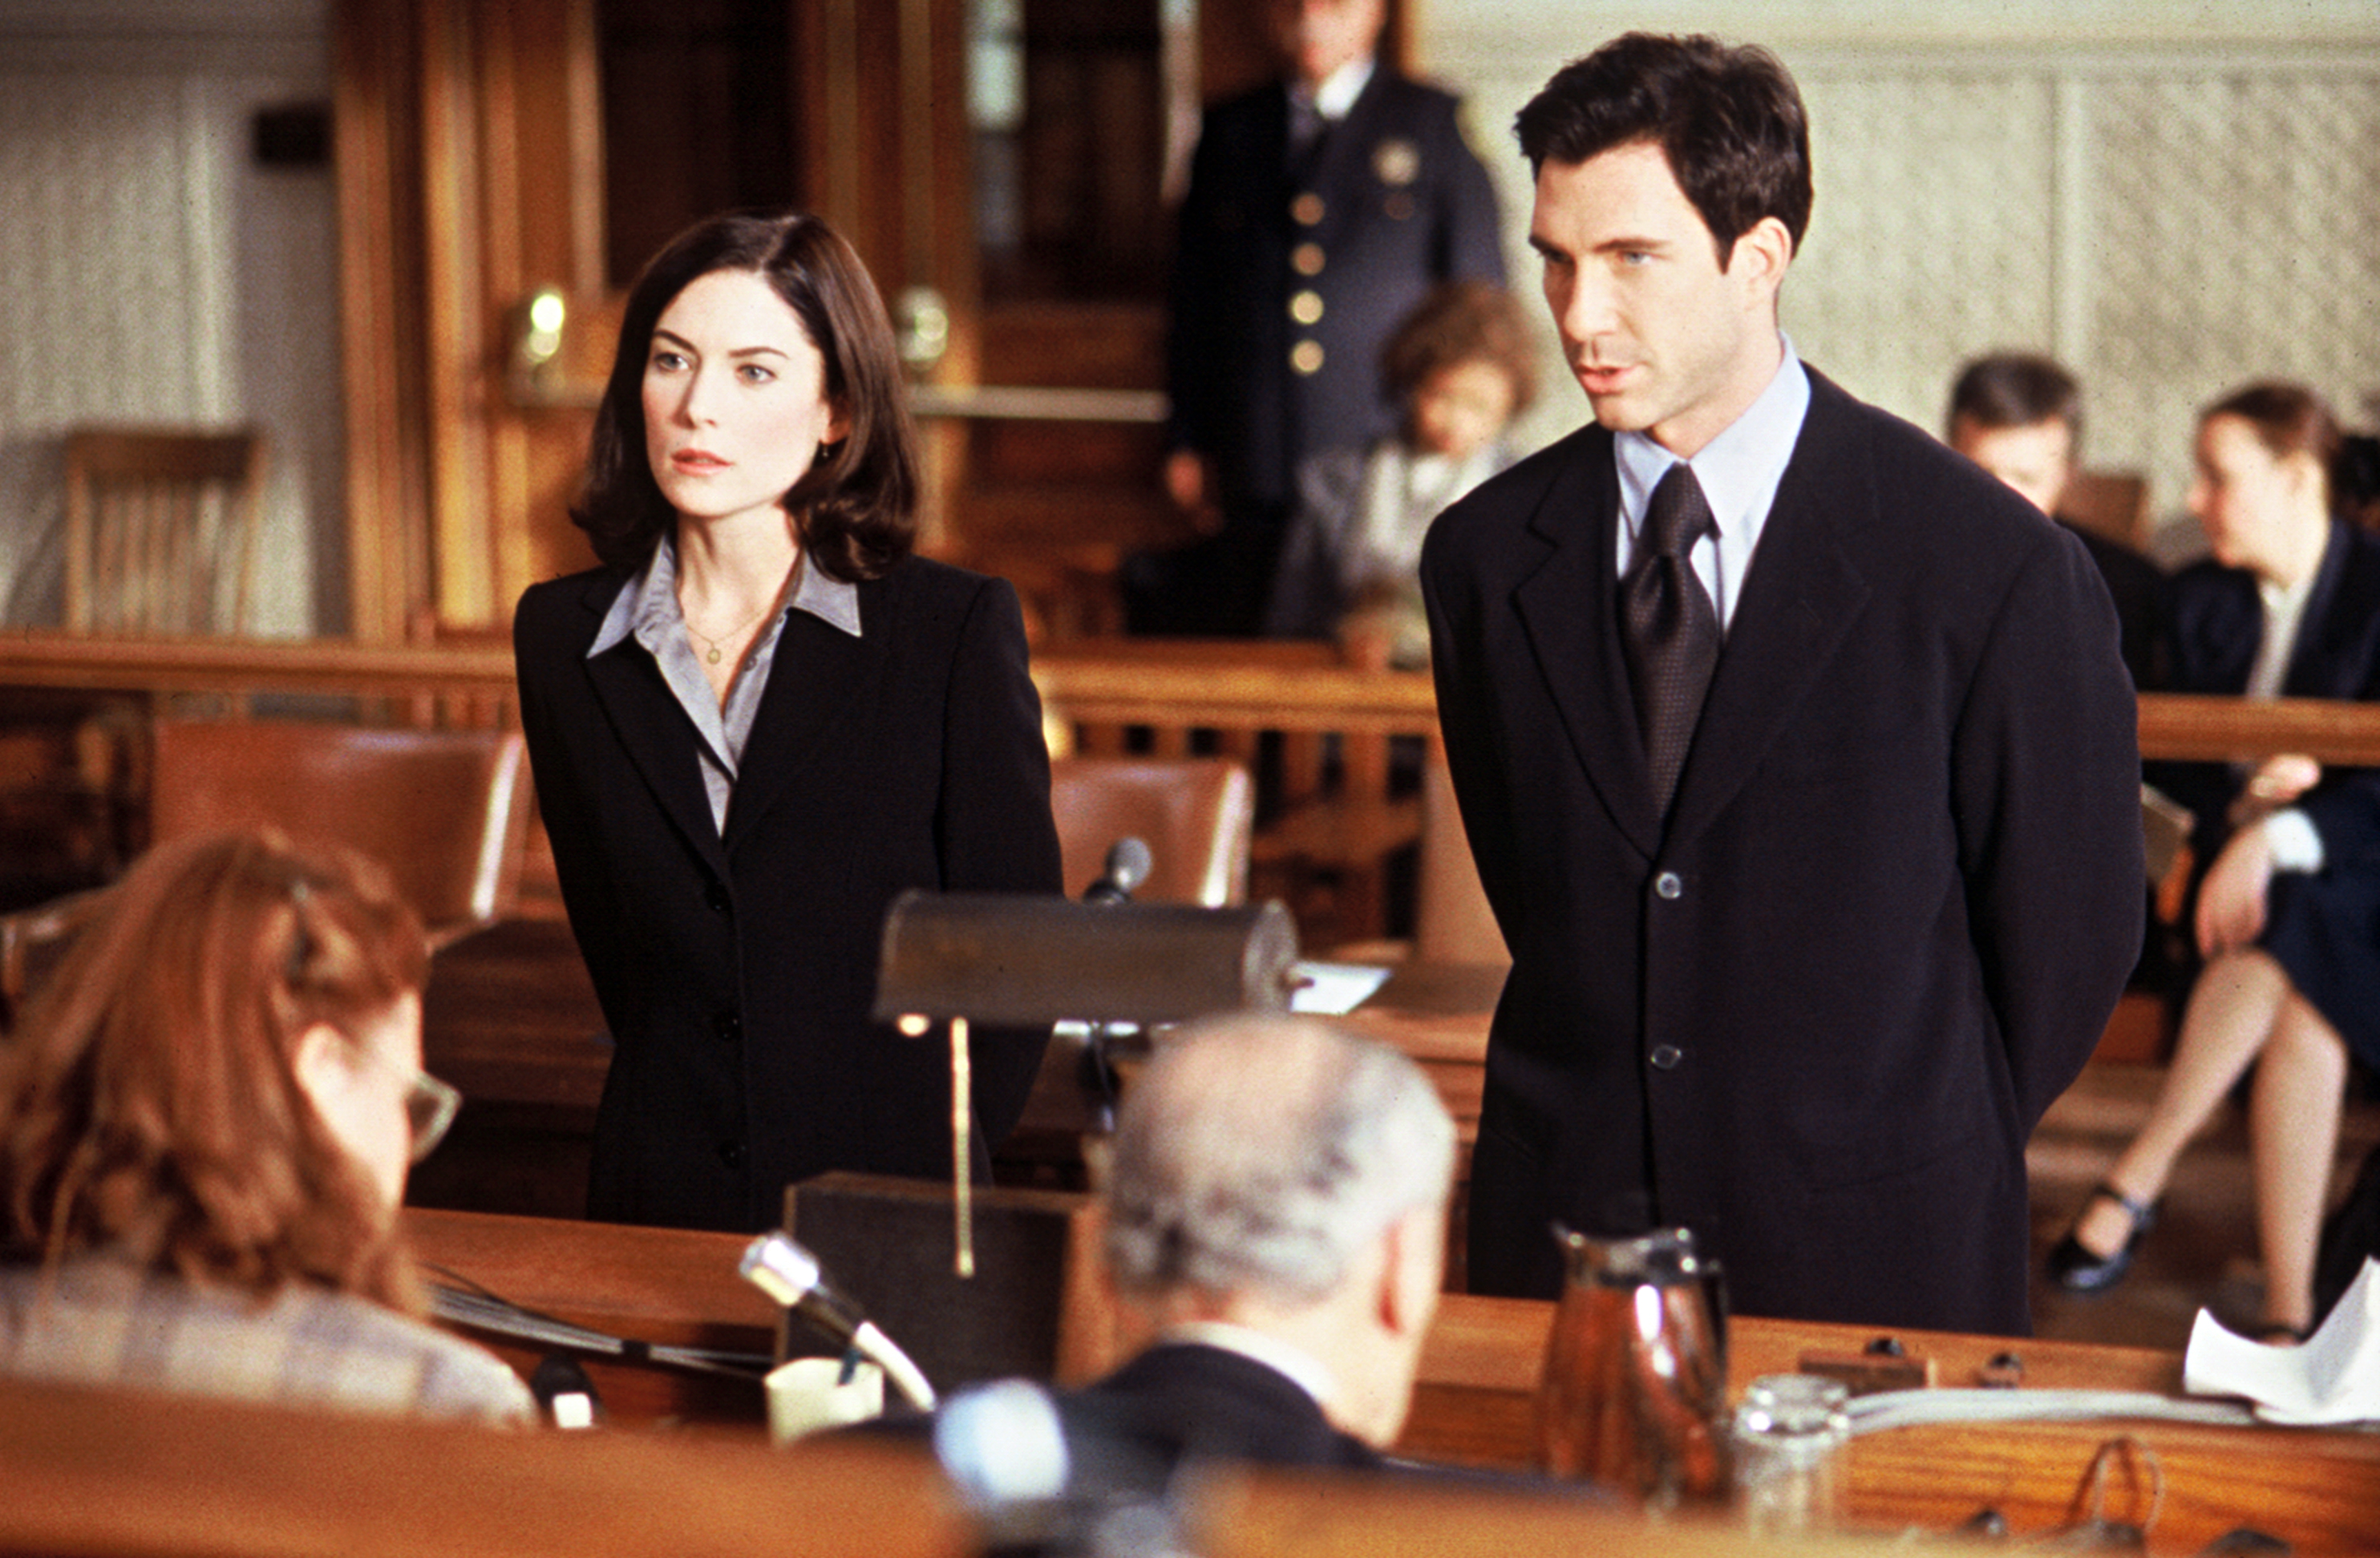 Lara Flynn Boyle as Helen with Dylan McDermott as Bobby on an episode of "Law and Order" | Source: Getty Images